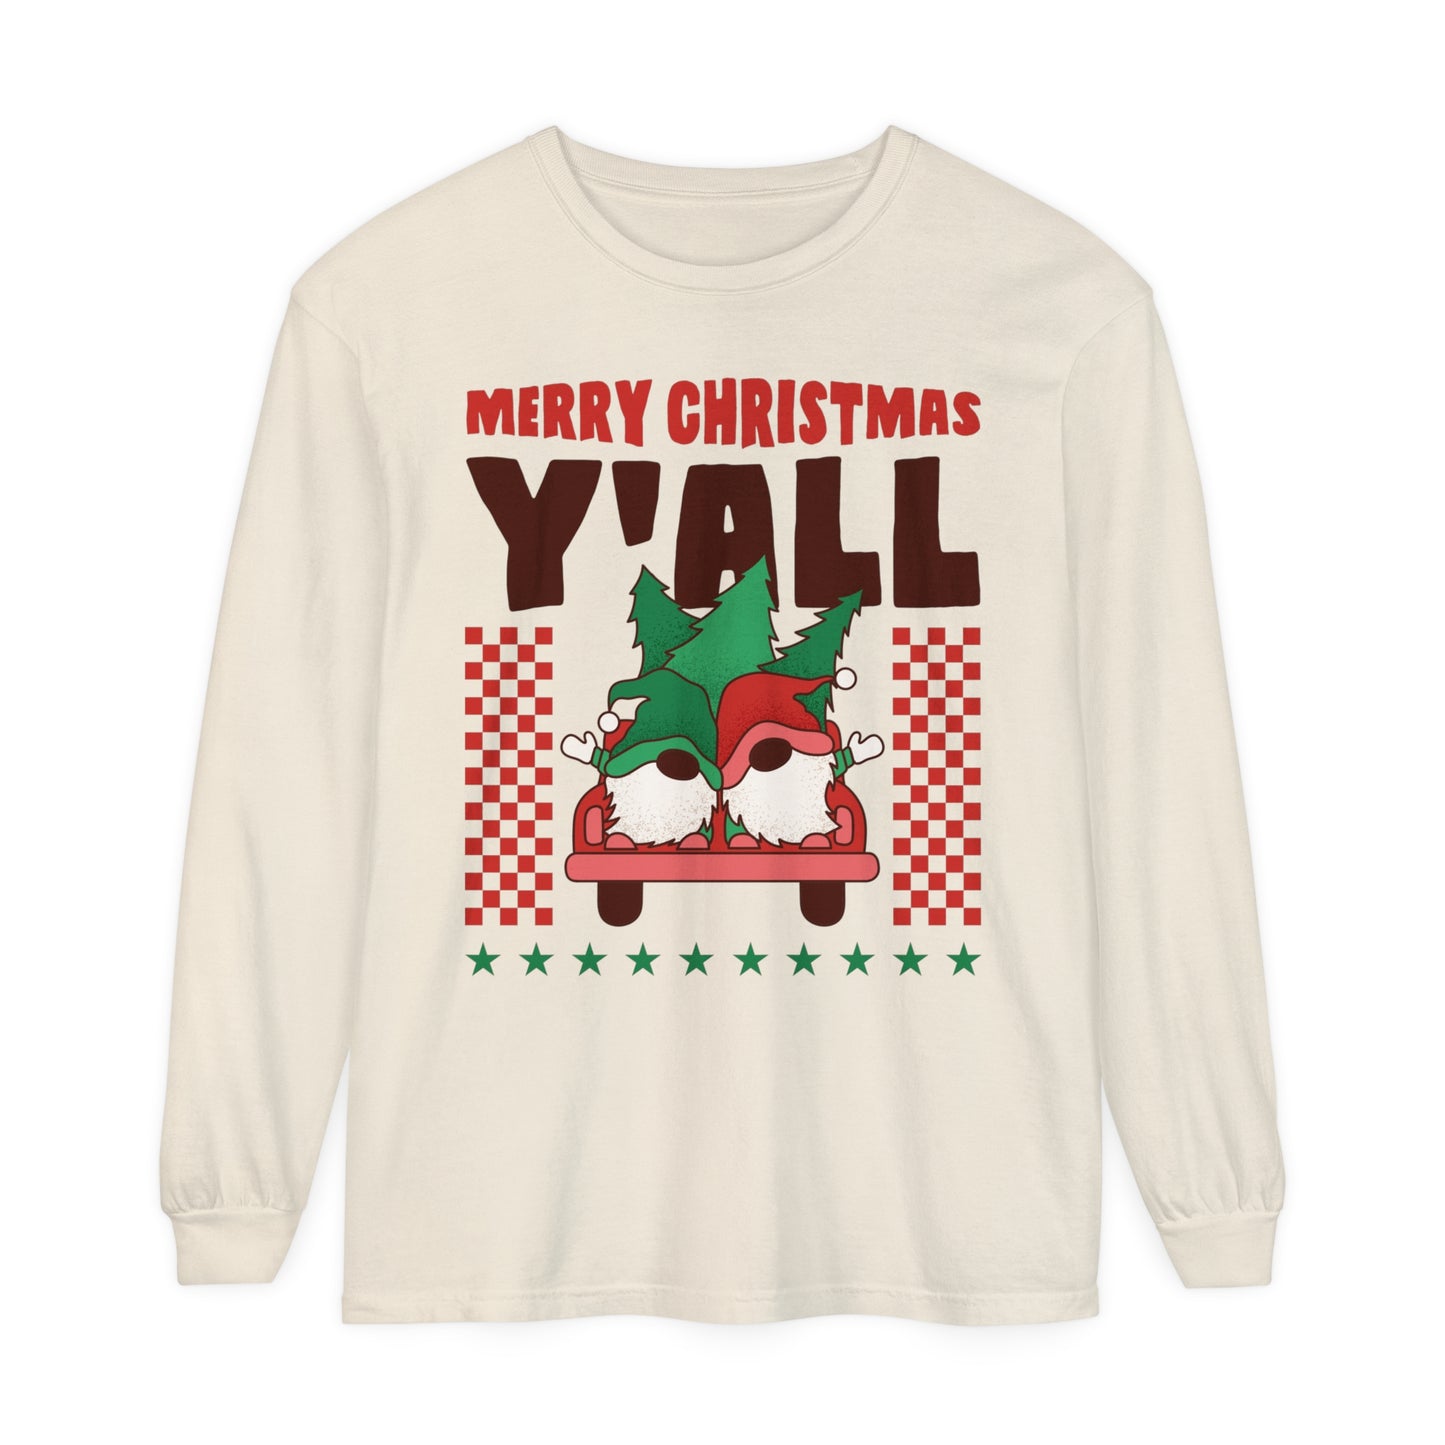 Merry Christmas Y'all Women's Christmas Holiday Loose Long Sleeve T-Shirt